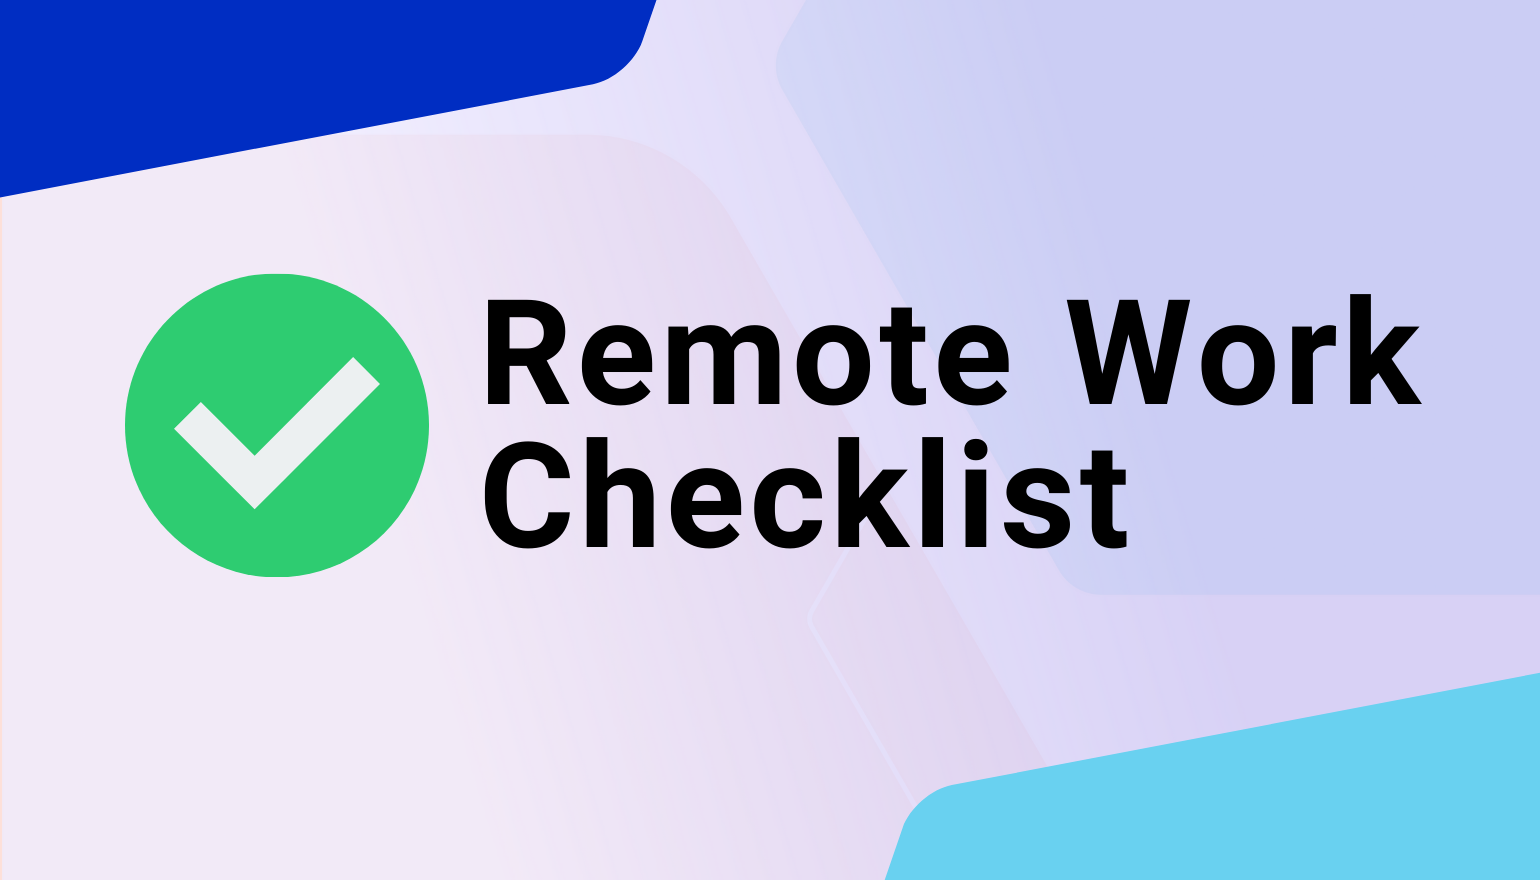 The Definitive Checklist for Making Remote Work Easier